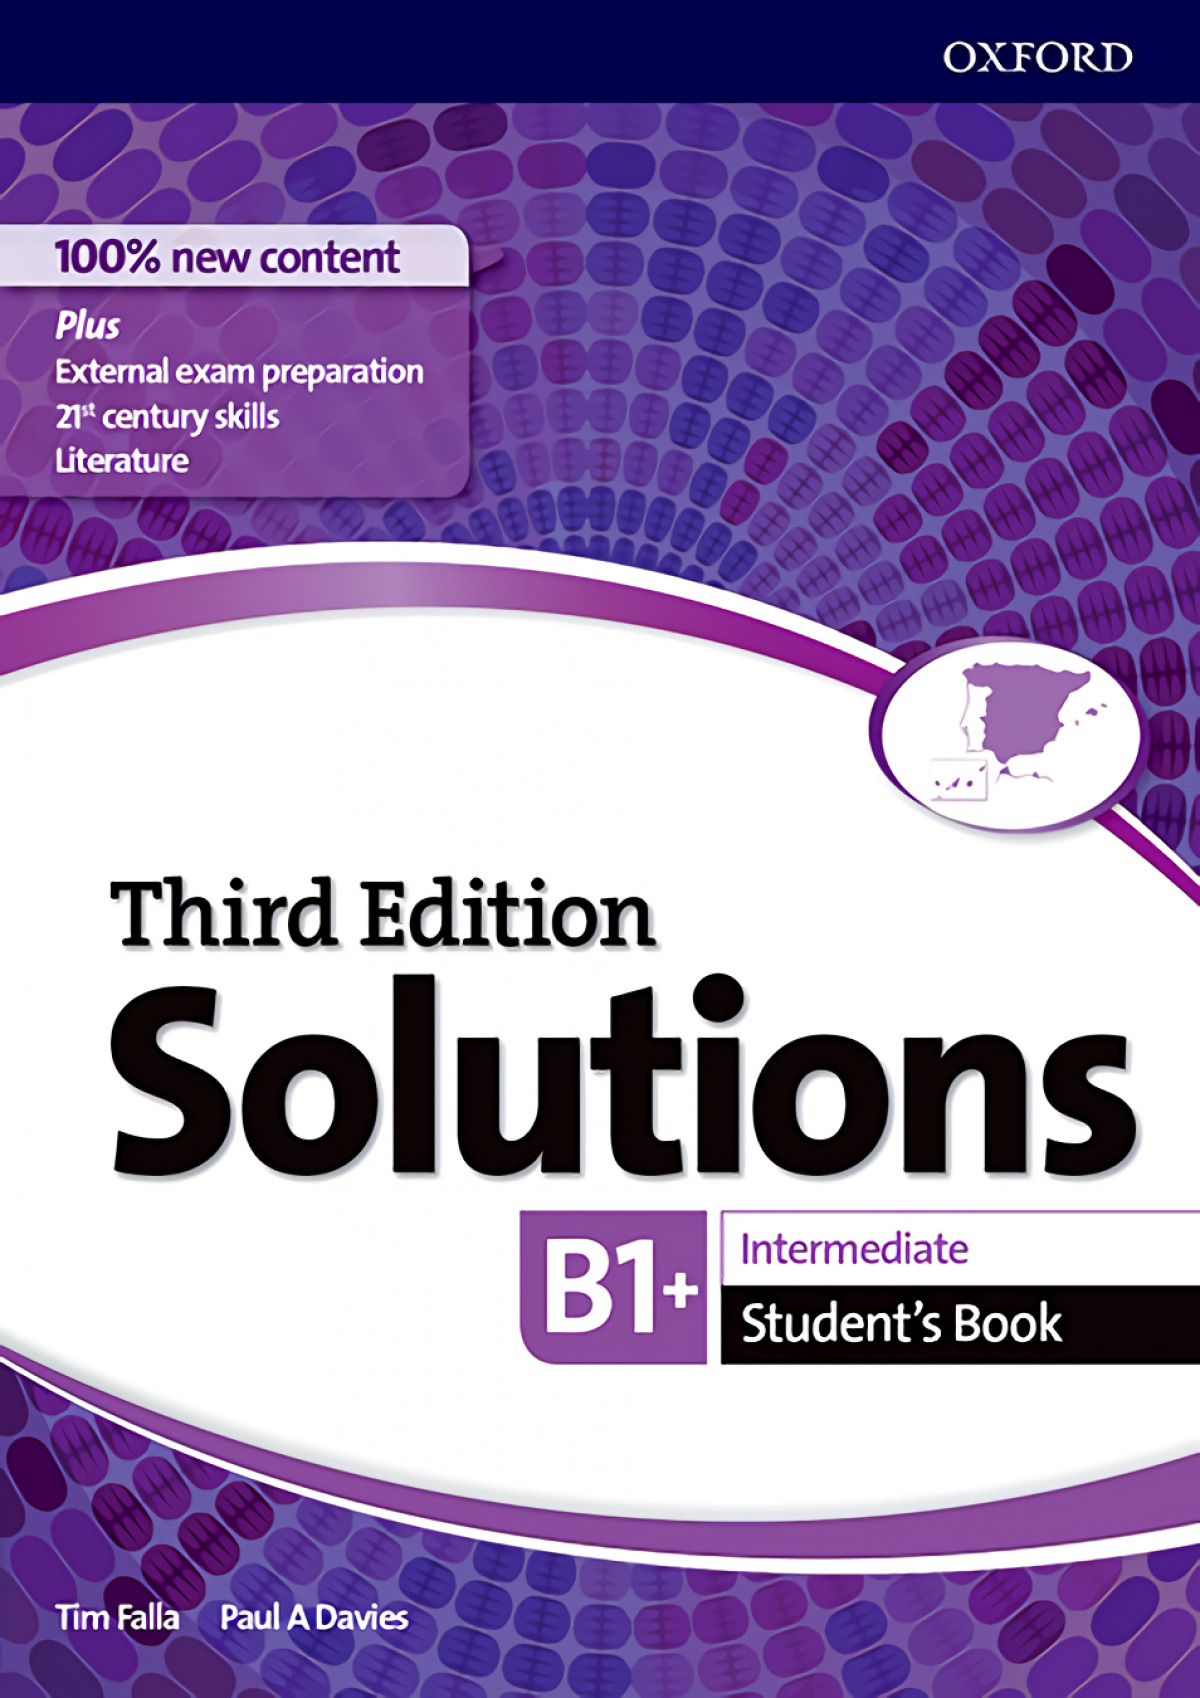 Oxford student s book. Solutions third Edition pre-Intermediate students 2g. Solutions pre-Intermediate 3rd Edition Tests. Third Edition solutions Intermediate student book пдф. Solution Intermediate 3 Edition Workbook.